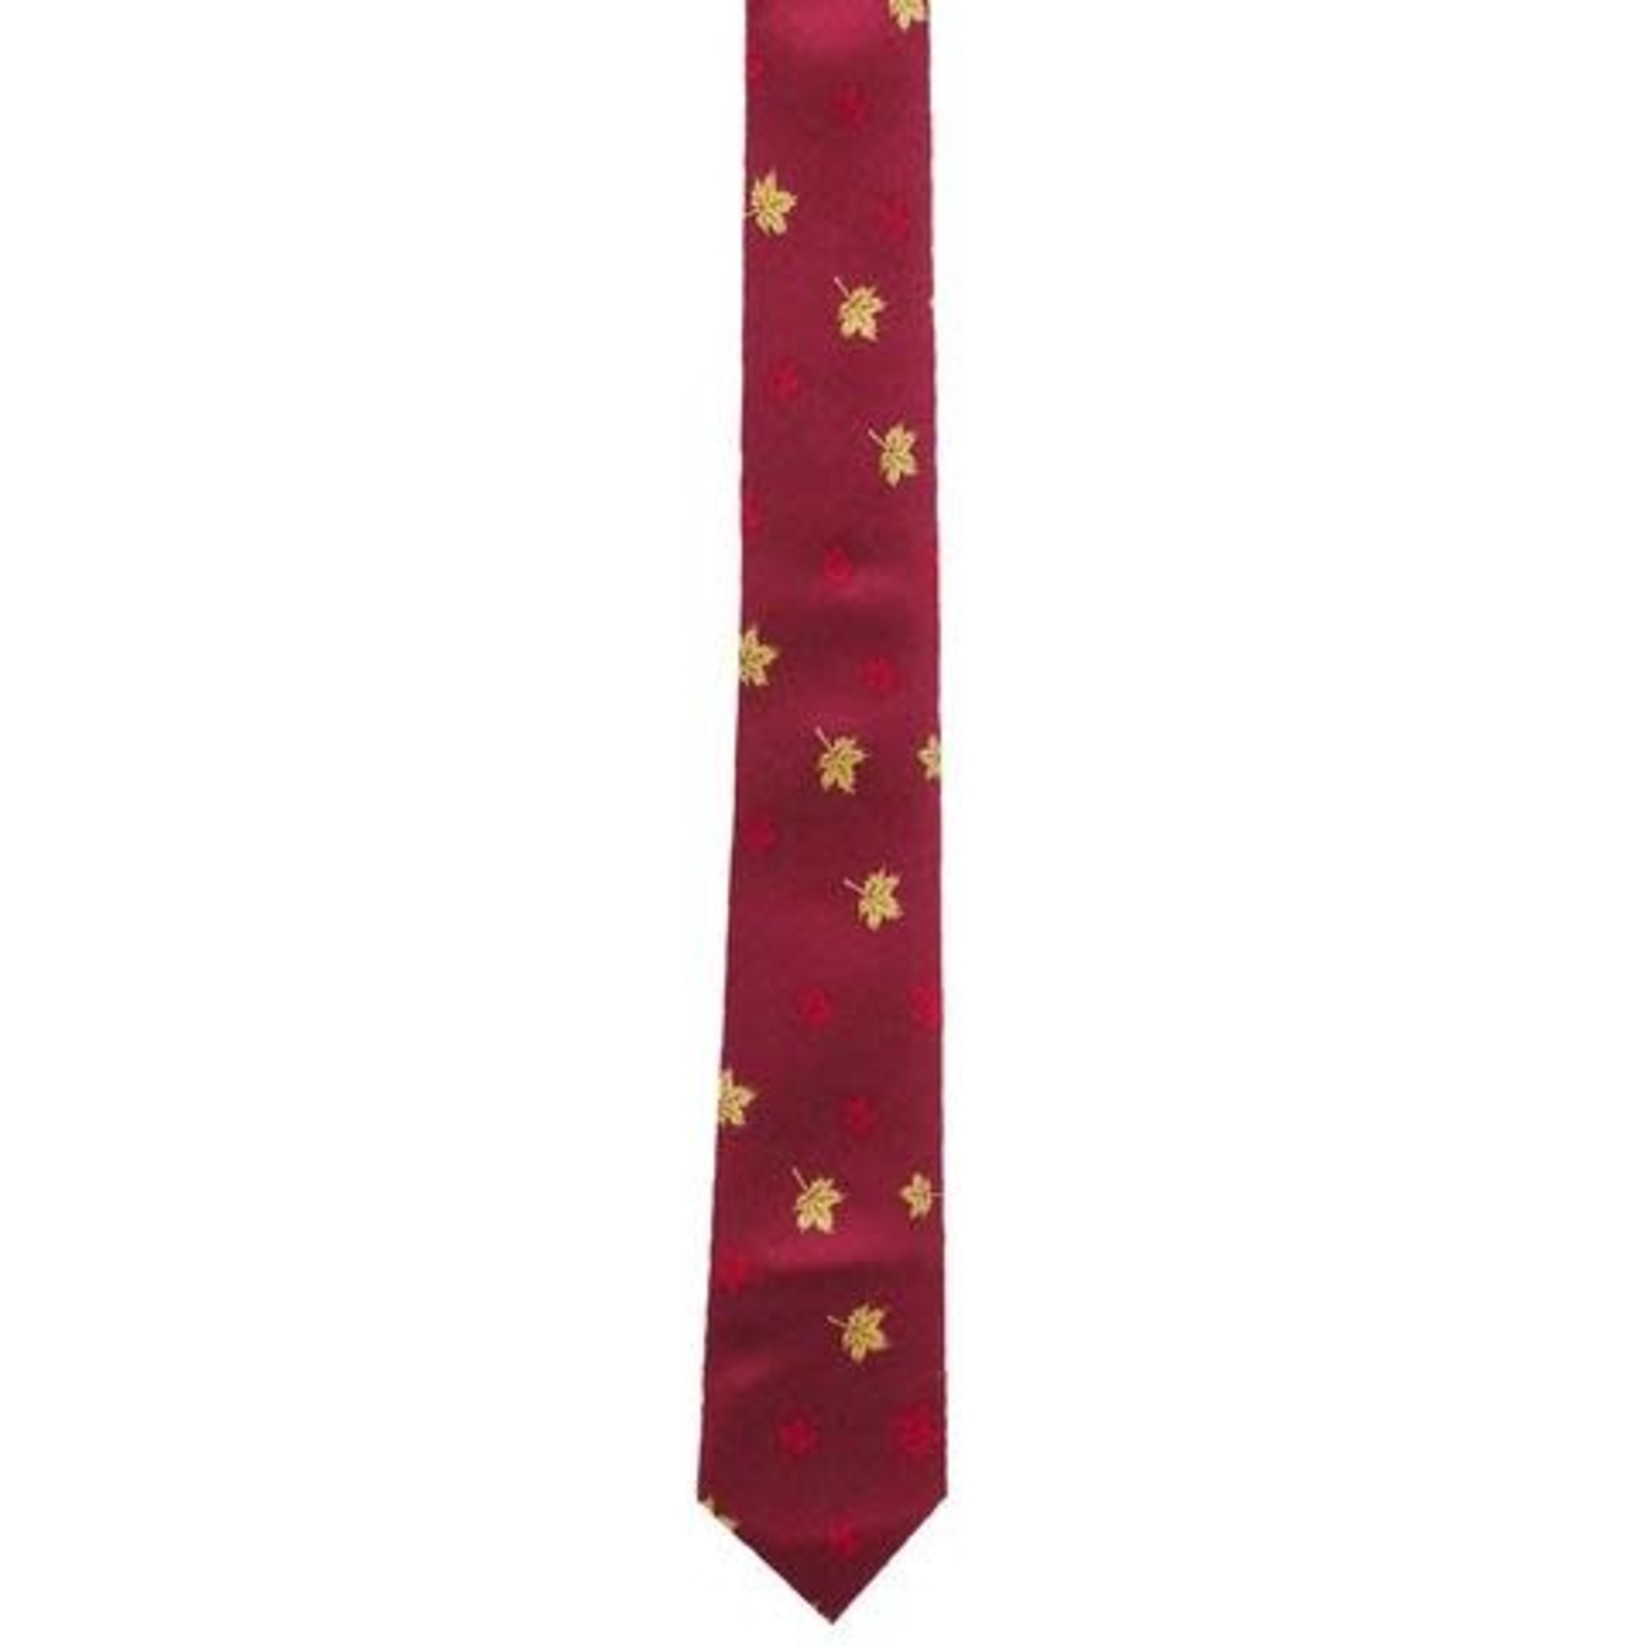 Tie - Red - Maple Leaf